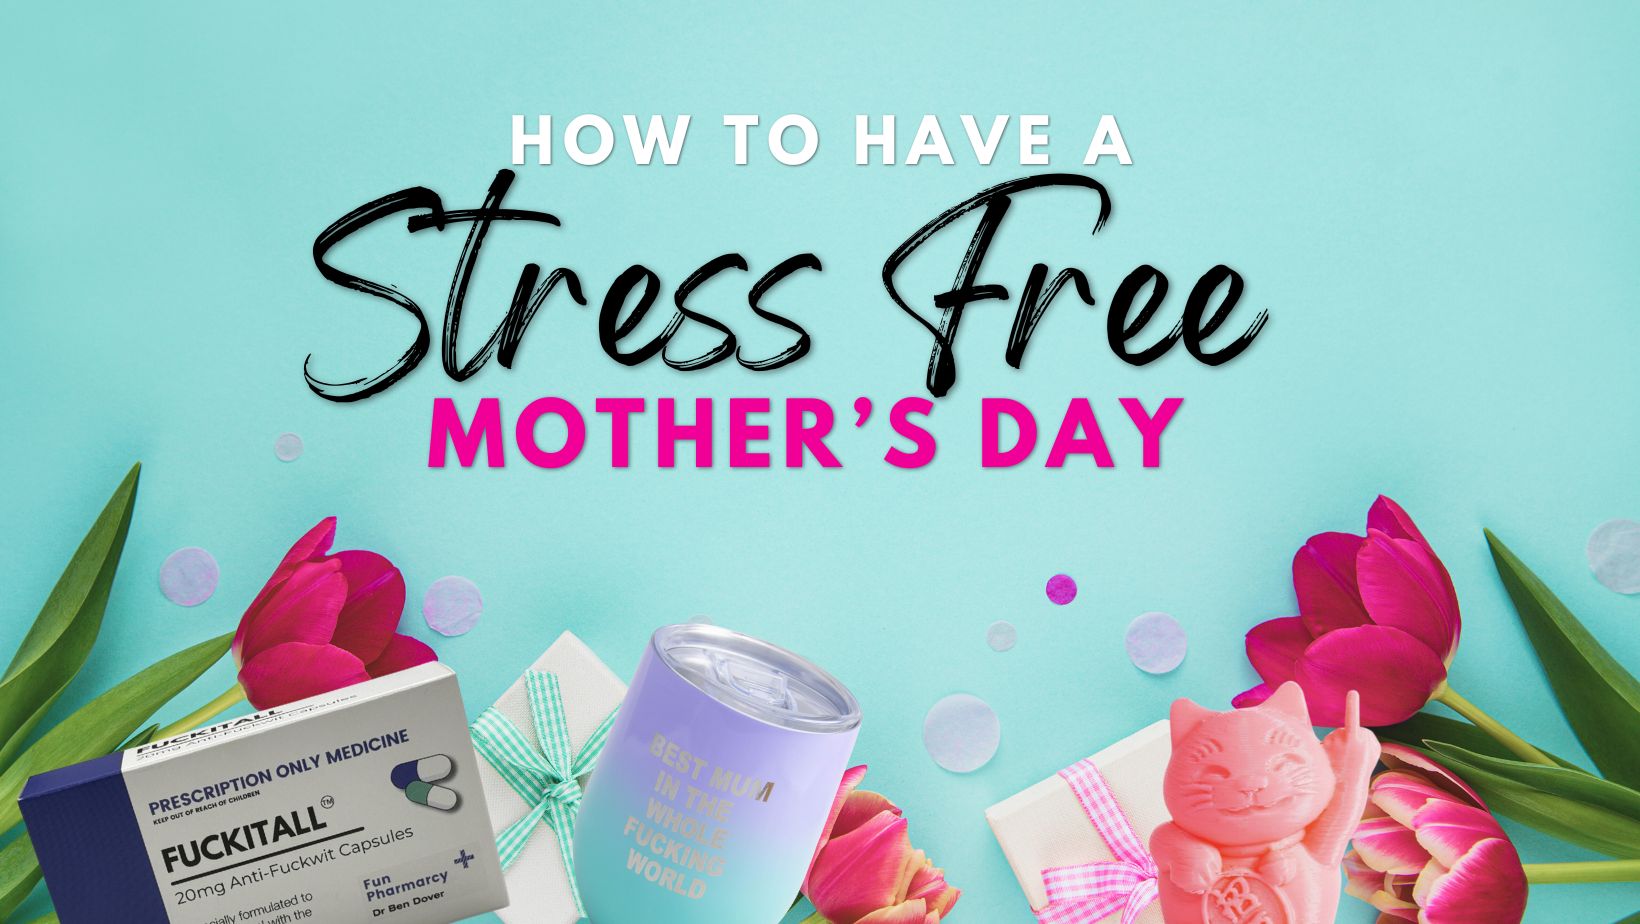 Mum: The Original Superhero! How to have a stress-free Mother's Day